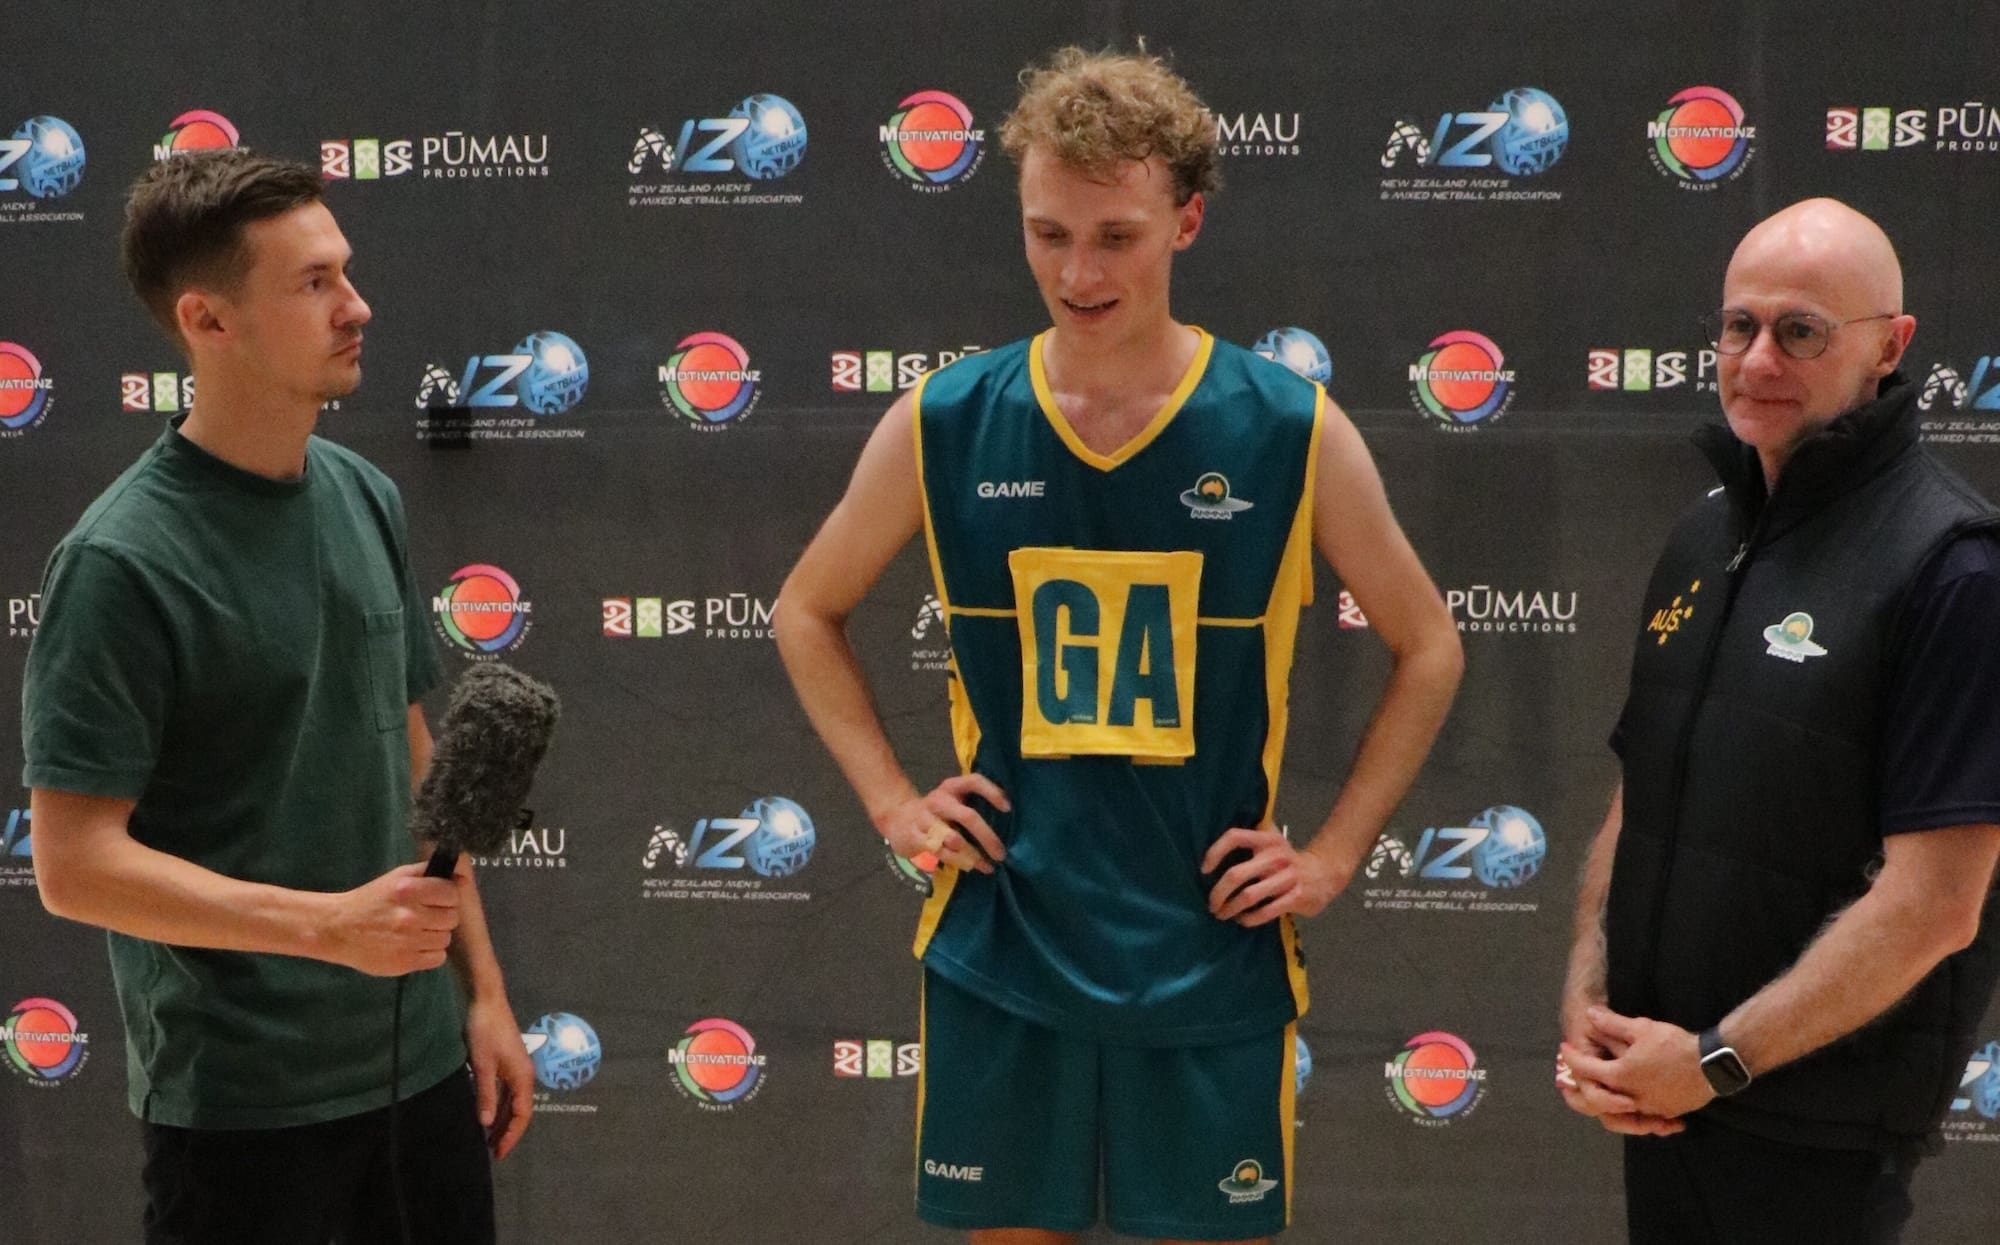 A male Australian netballer is interviewed by Cameron, while another man stands next to them